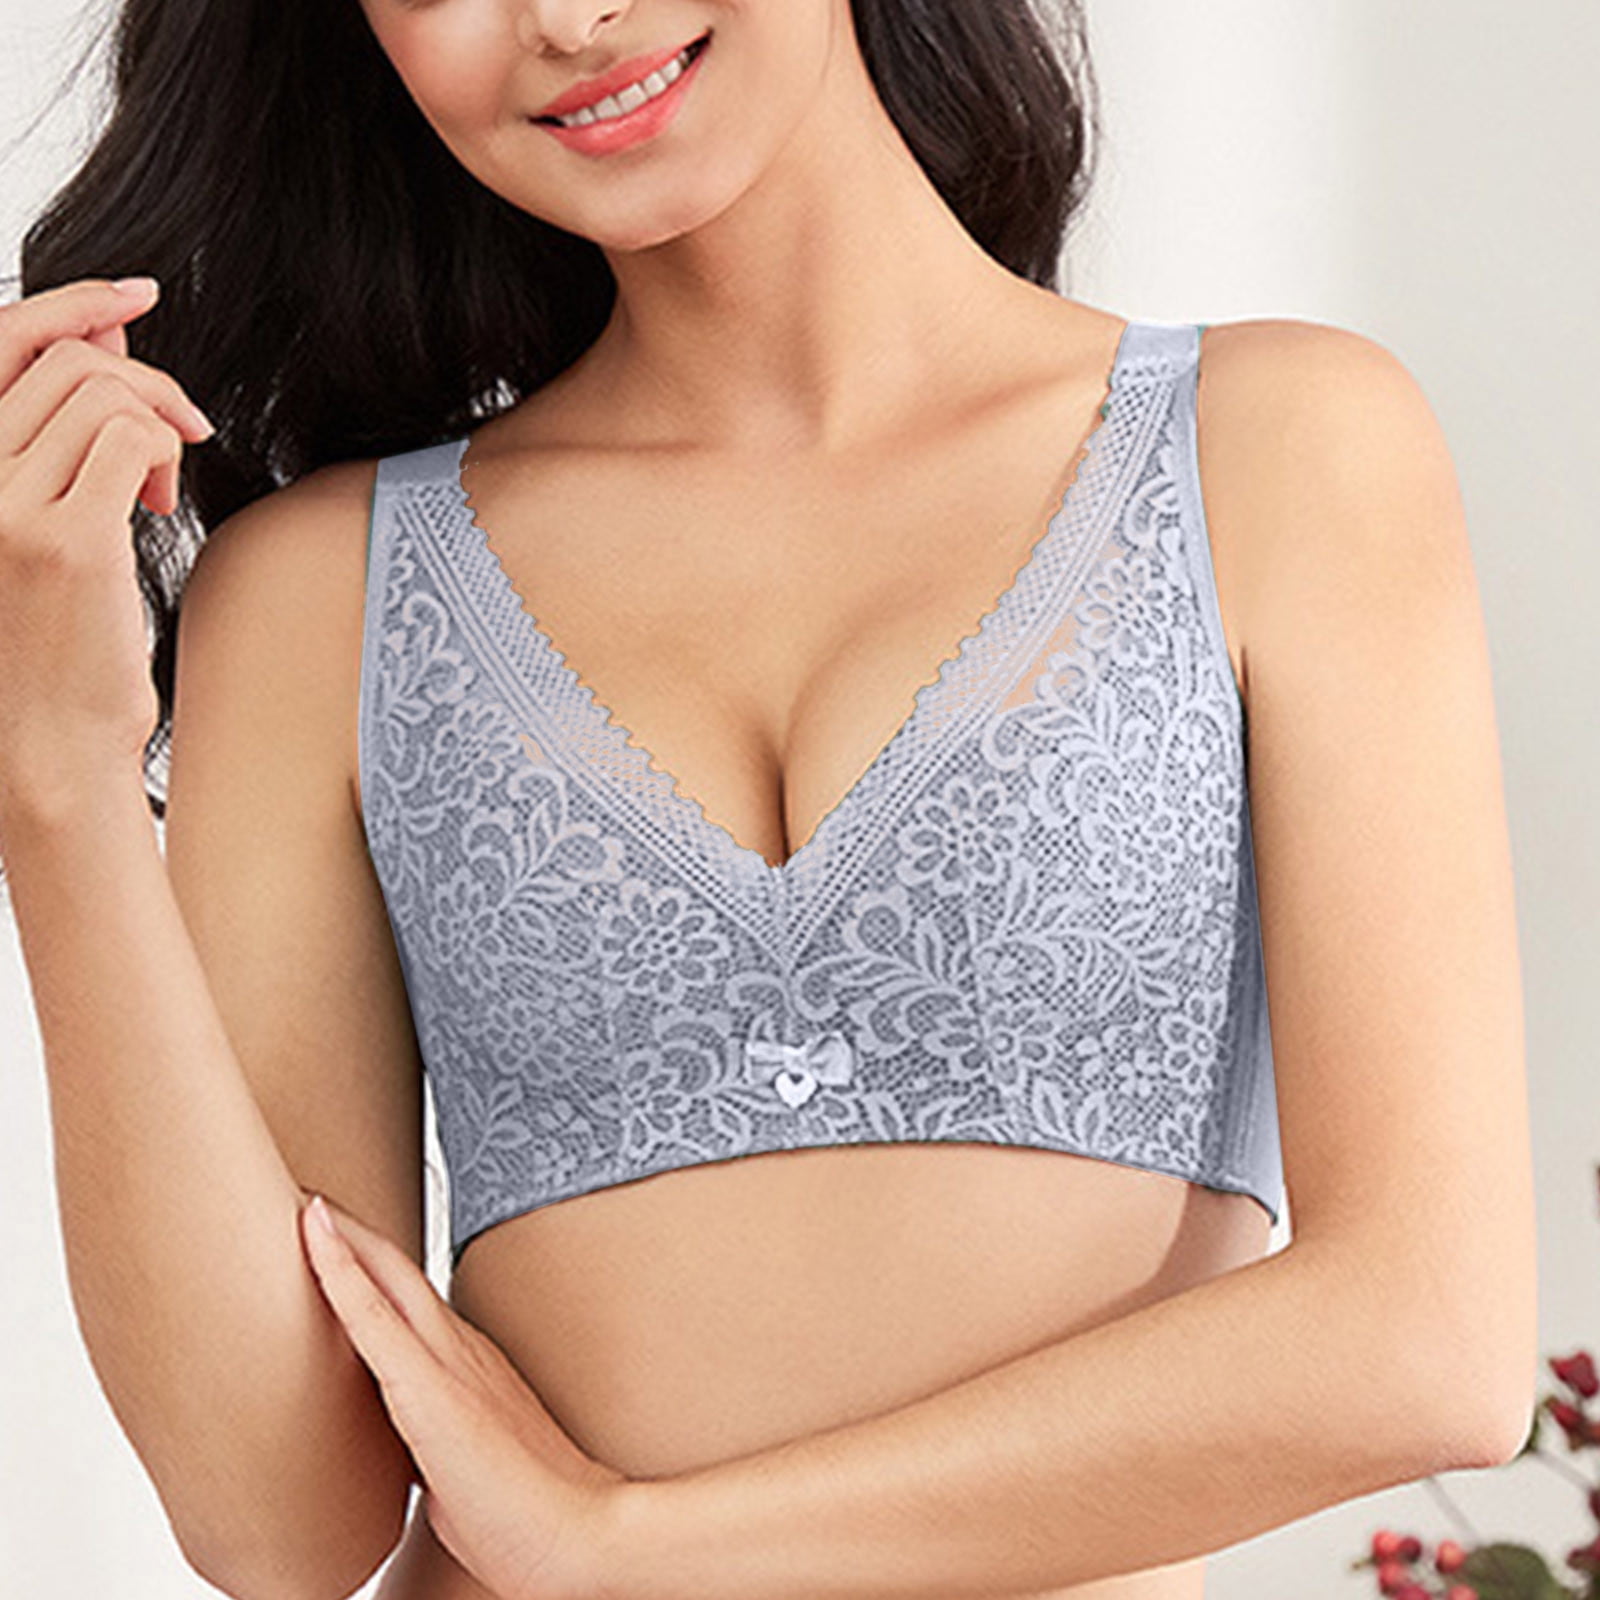 Minimizer Push Up Plus Size Bras For Women Sexy Lace Lingerie Crop Top Bh  Brassiere Girl Floral BCD Cup 36 38 Bralette From Crazyshoppingstreet,  $16.73